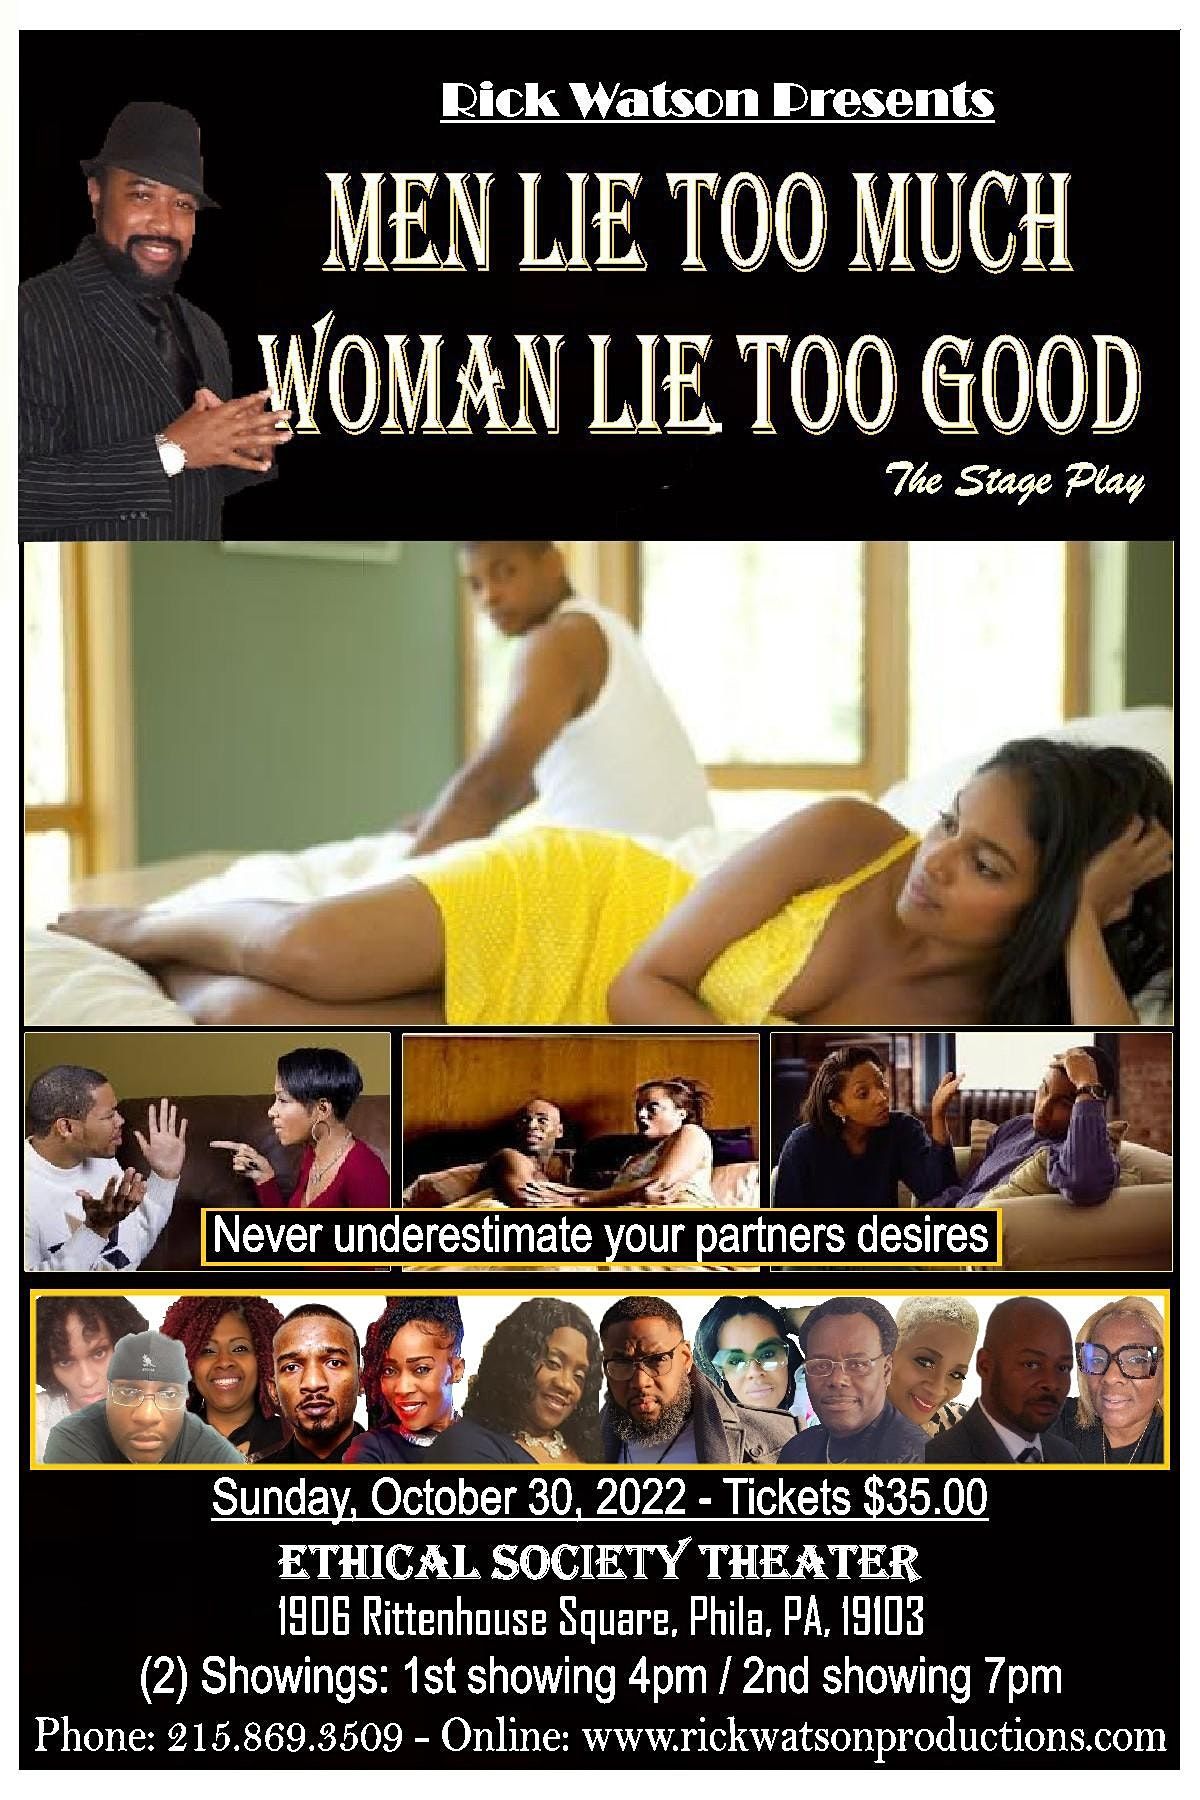 MEN LIE TOO MUCH WOMEN LIE TOO GOOD The Stage Play